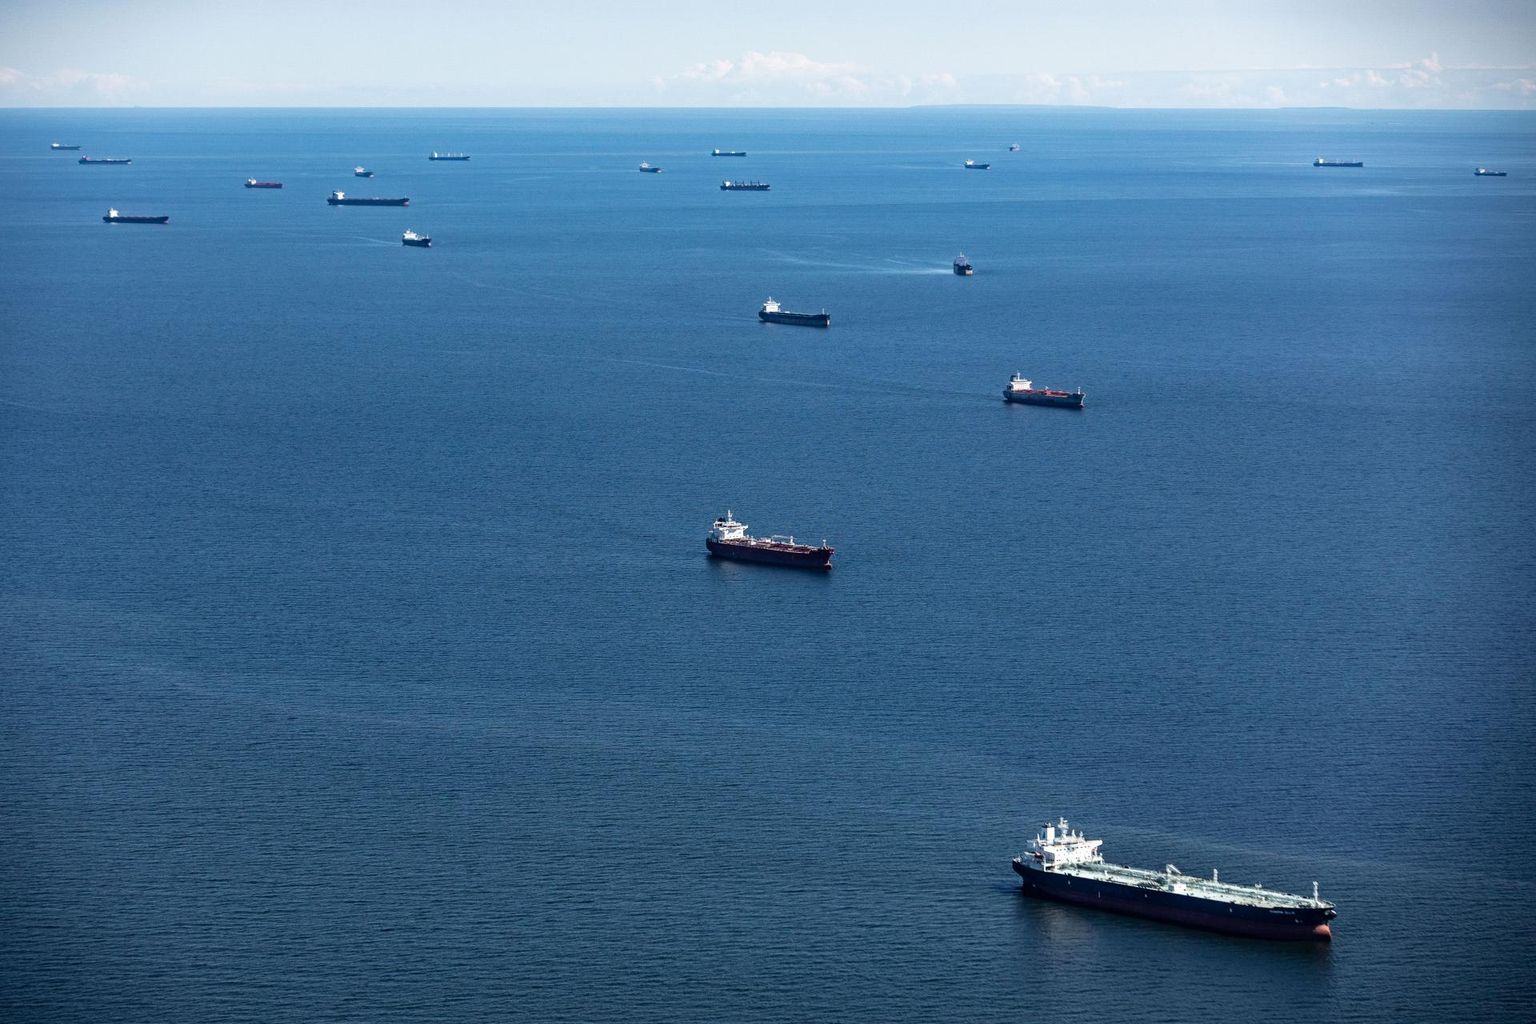 An unofficial anchorage area for tankers and cargo ships waiting to enter Russian ports in the part of the Gulf of Finland that is part of the Estonian economic zone. On Sunday, 21 ships were waiting there.